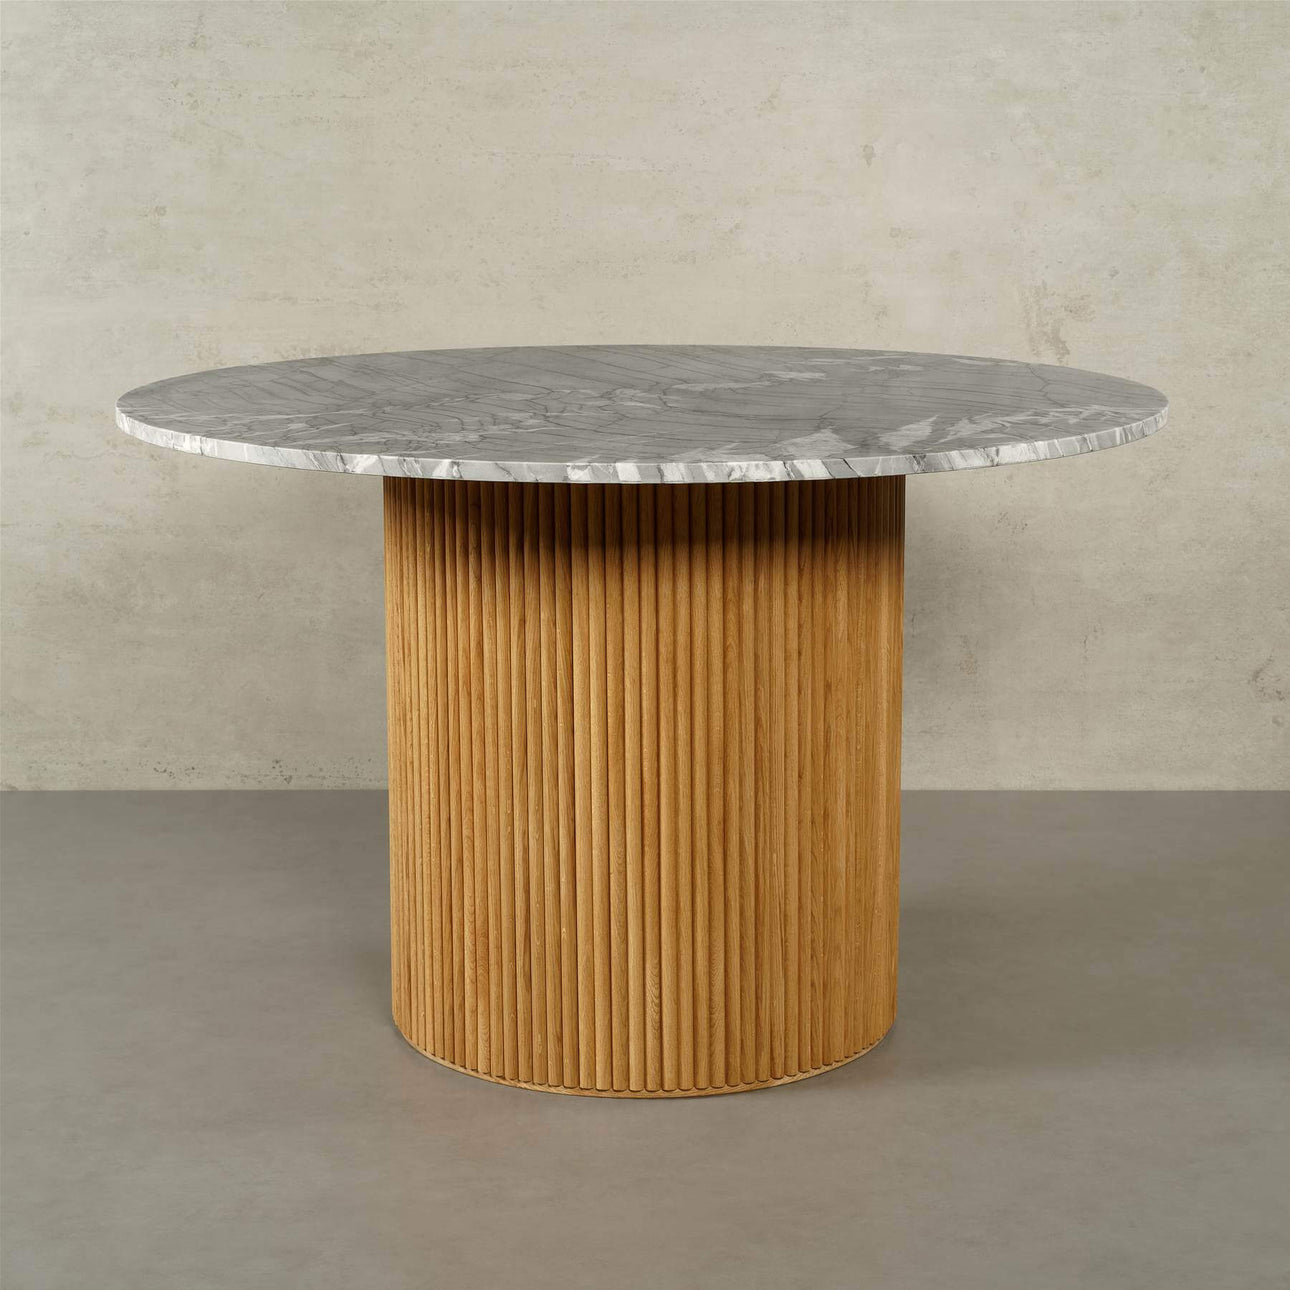 Victoria marble dining table